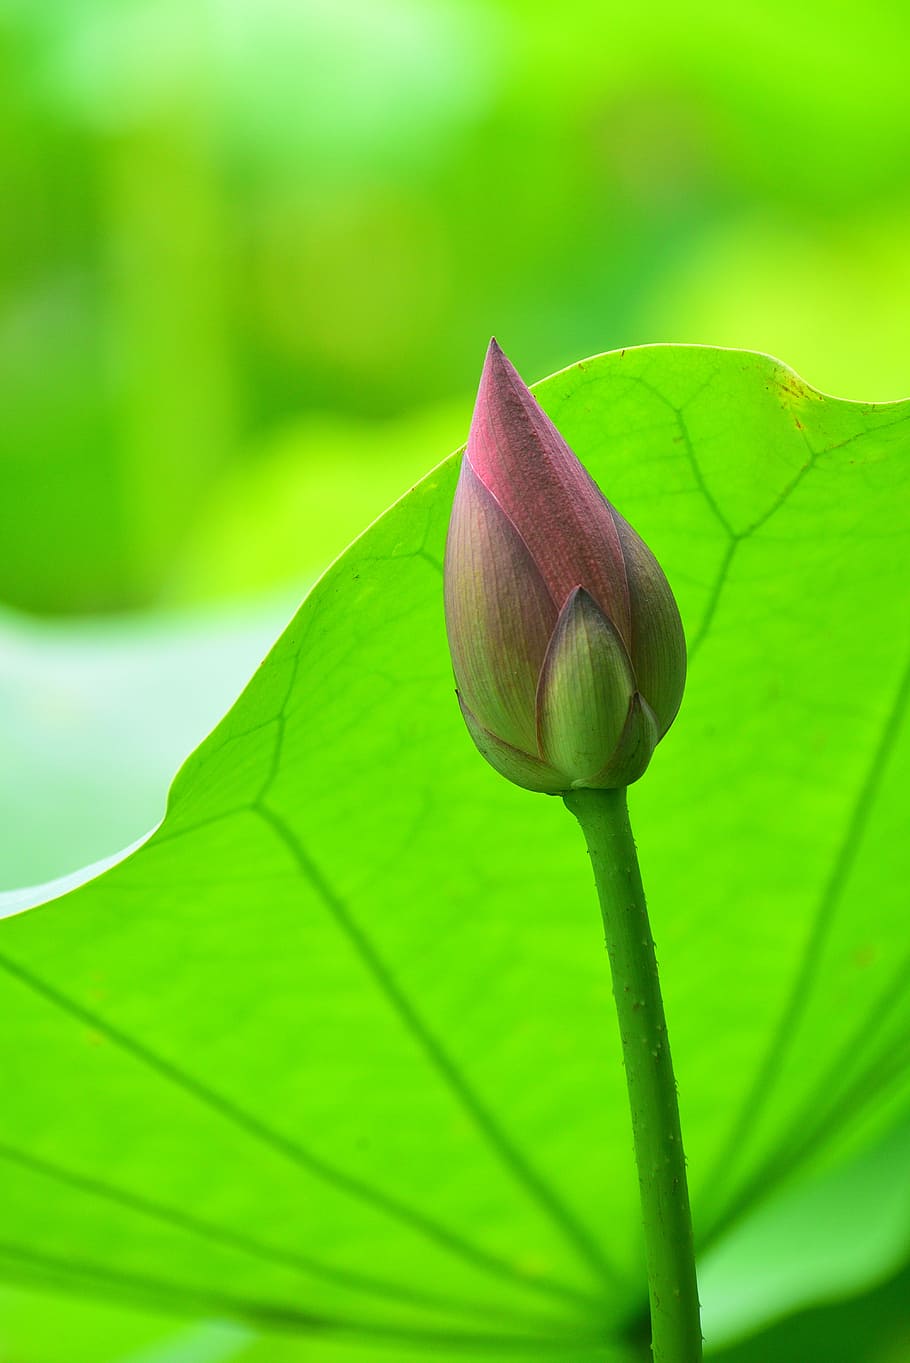 plant, flower, lotus, aquatic plants, plant part, leaf, close-up, green color, beauty in nature, focus on foreground